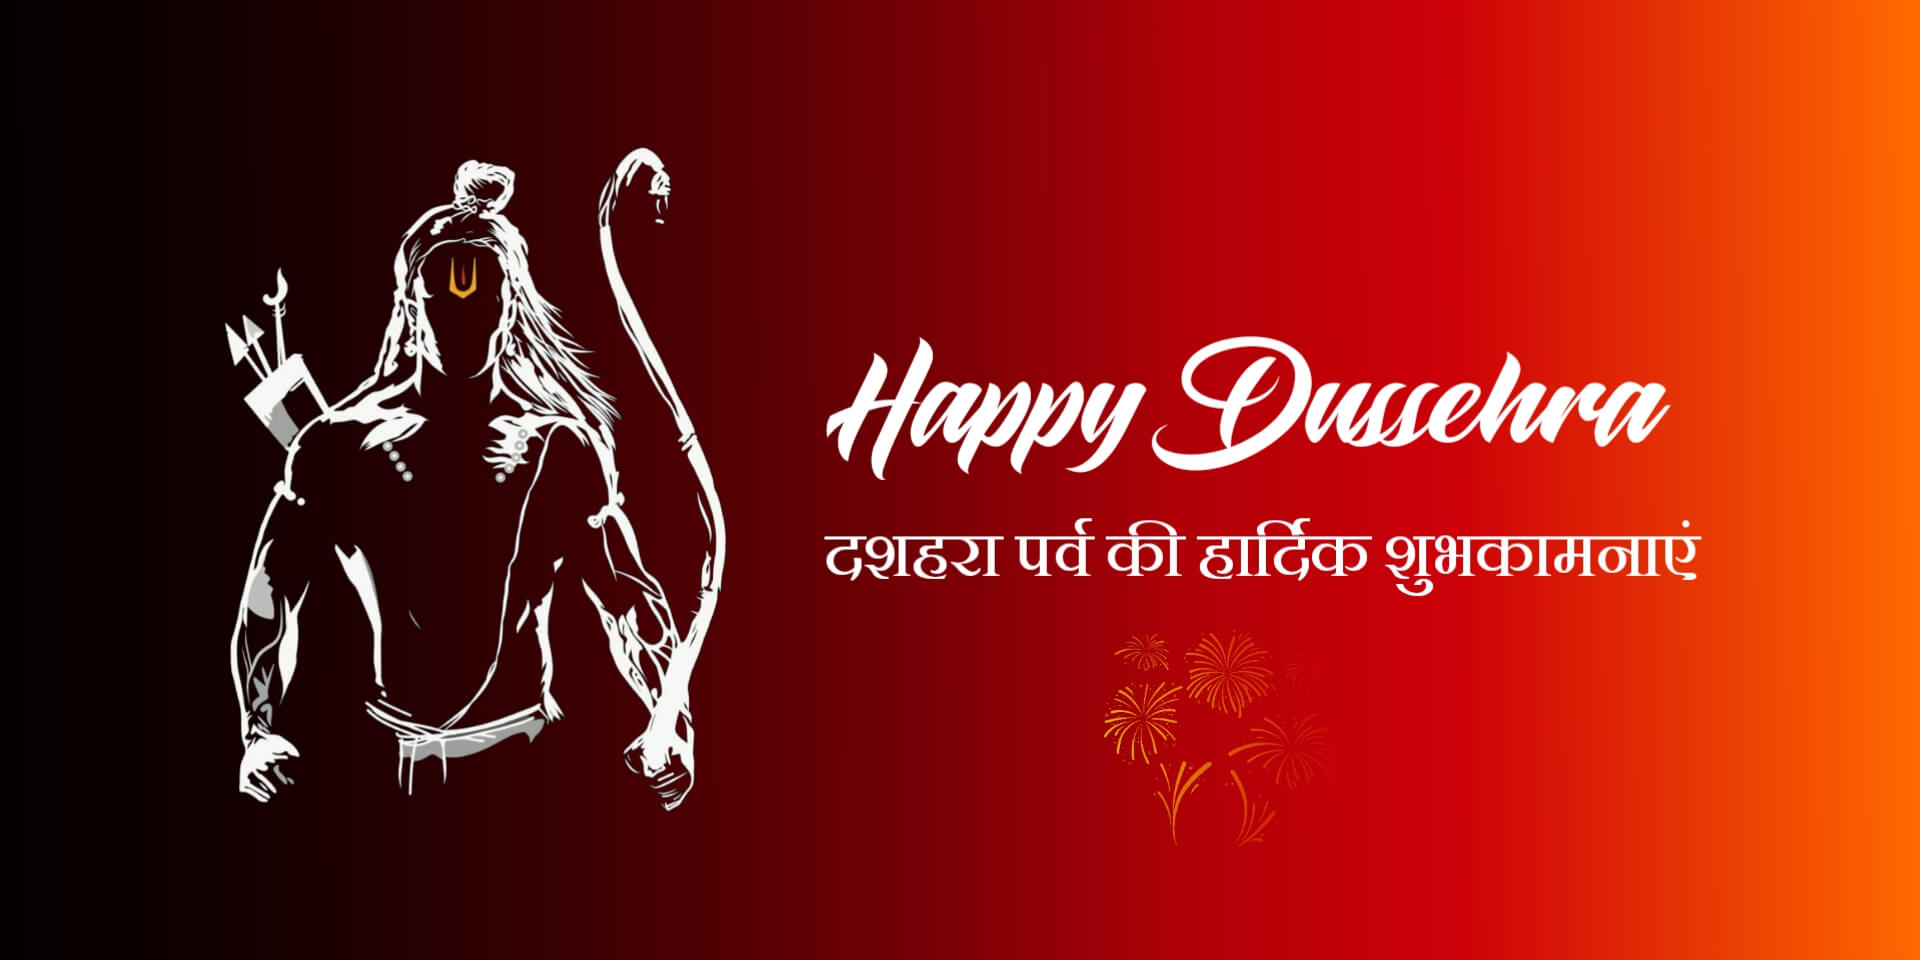 Dussehra 2021 : Dussehra Hindi wishes, quotes, greetings, sms